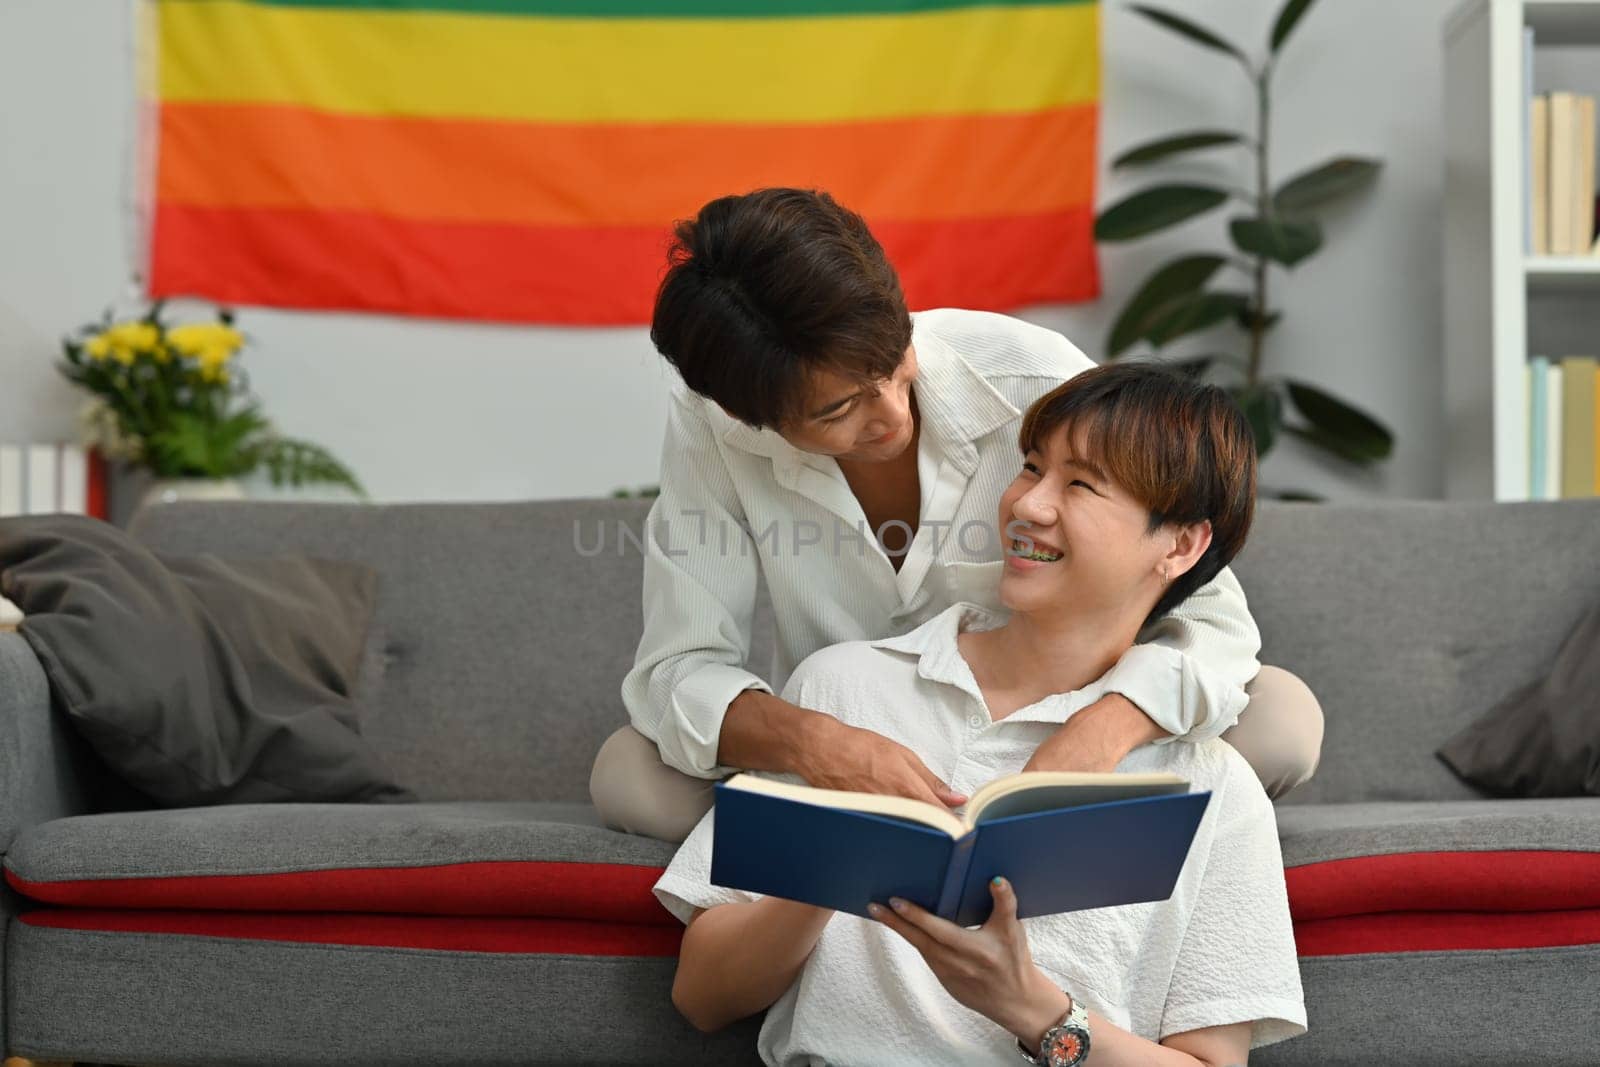 Happy moment of two young male lovers embracing each other and reading book in living room. Homosexual and love concept.